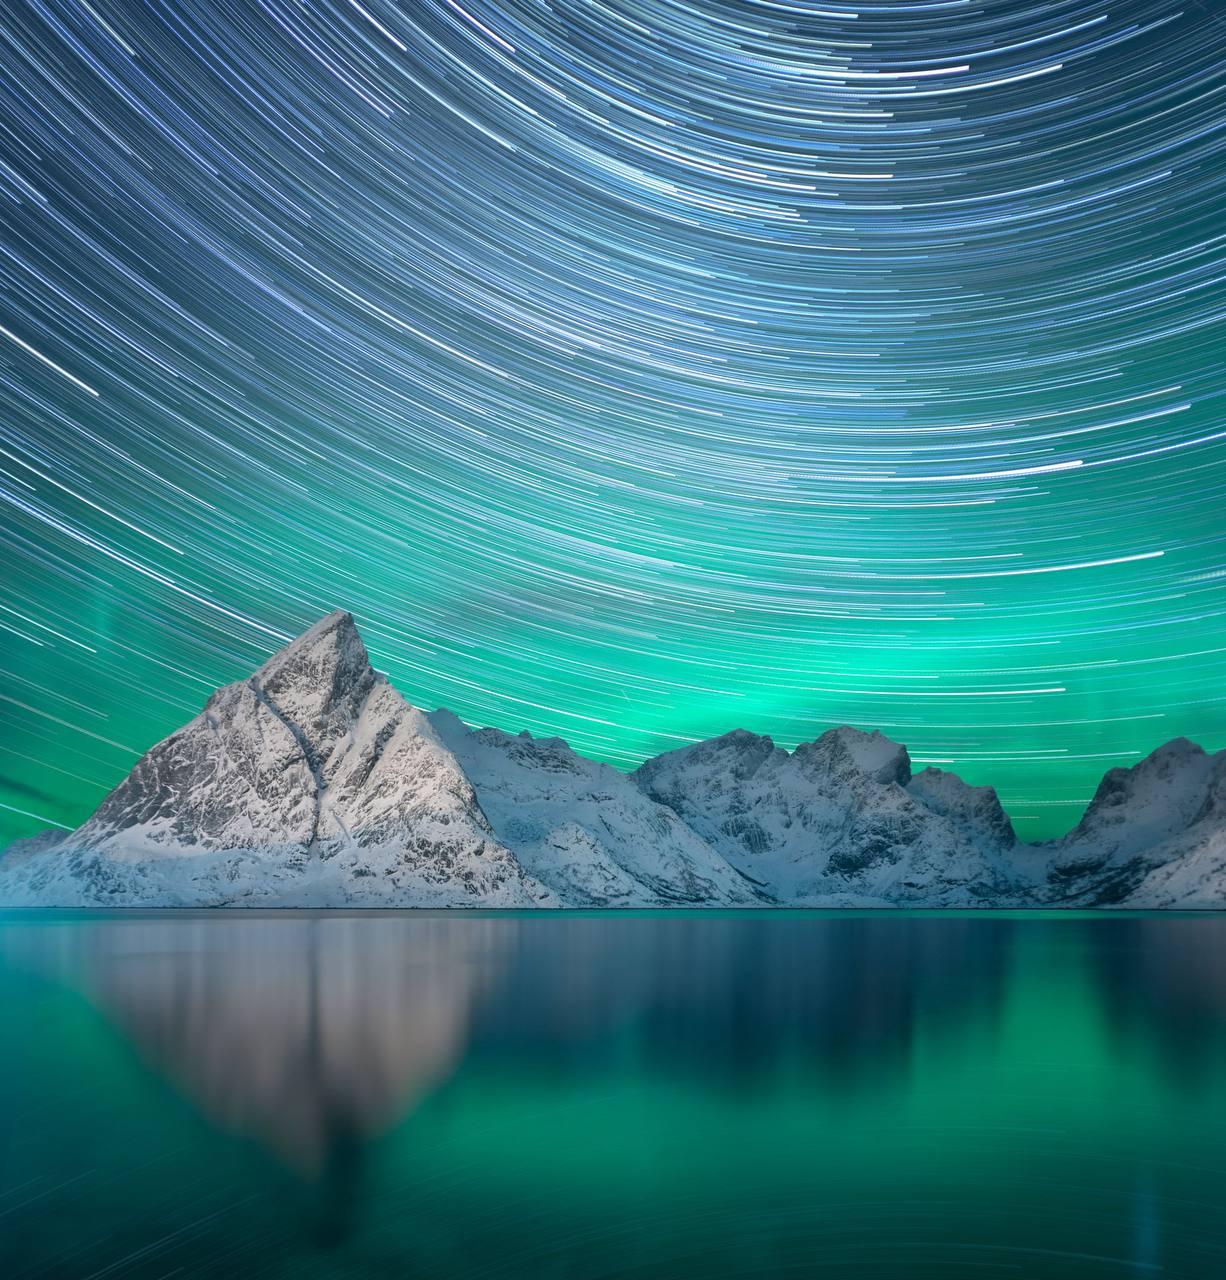 Anna Dobrovolskaya-Mints Color Photograph - Norwegian Northern Lights: Colorful Square Photo with Star Trails